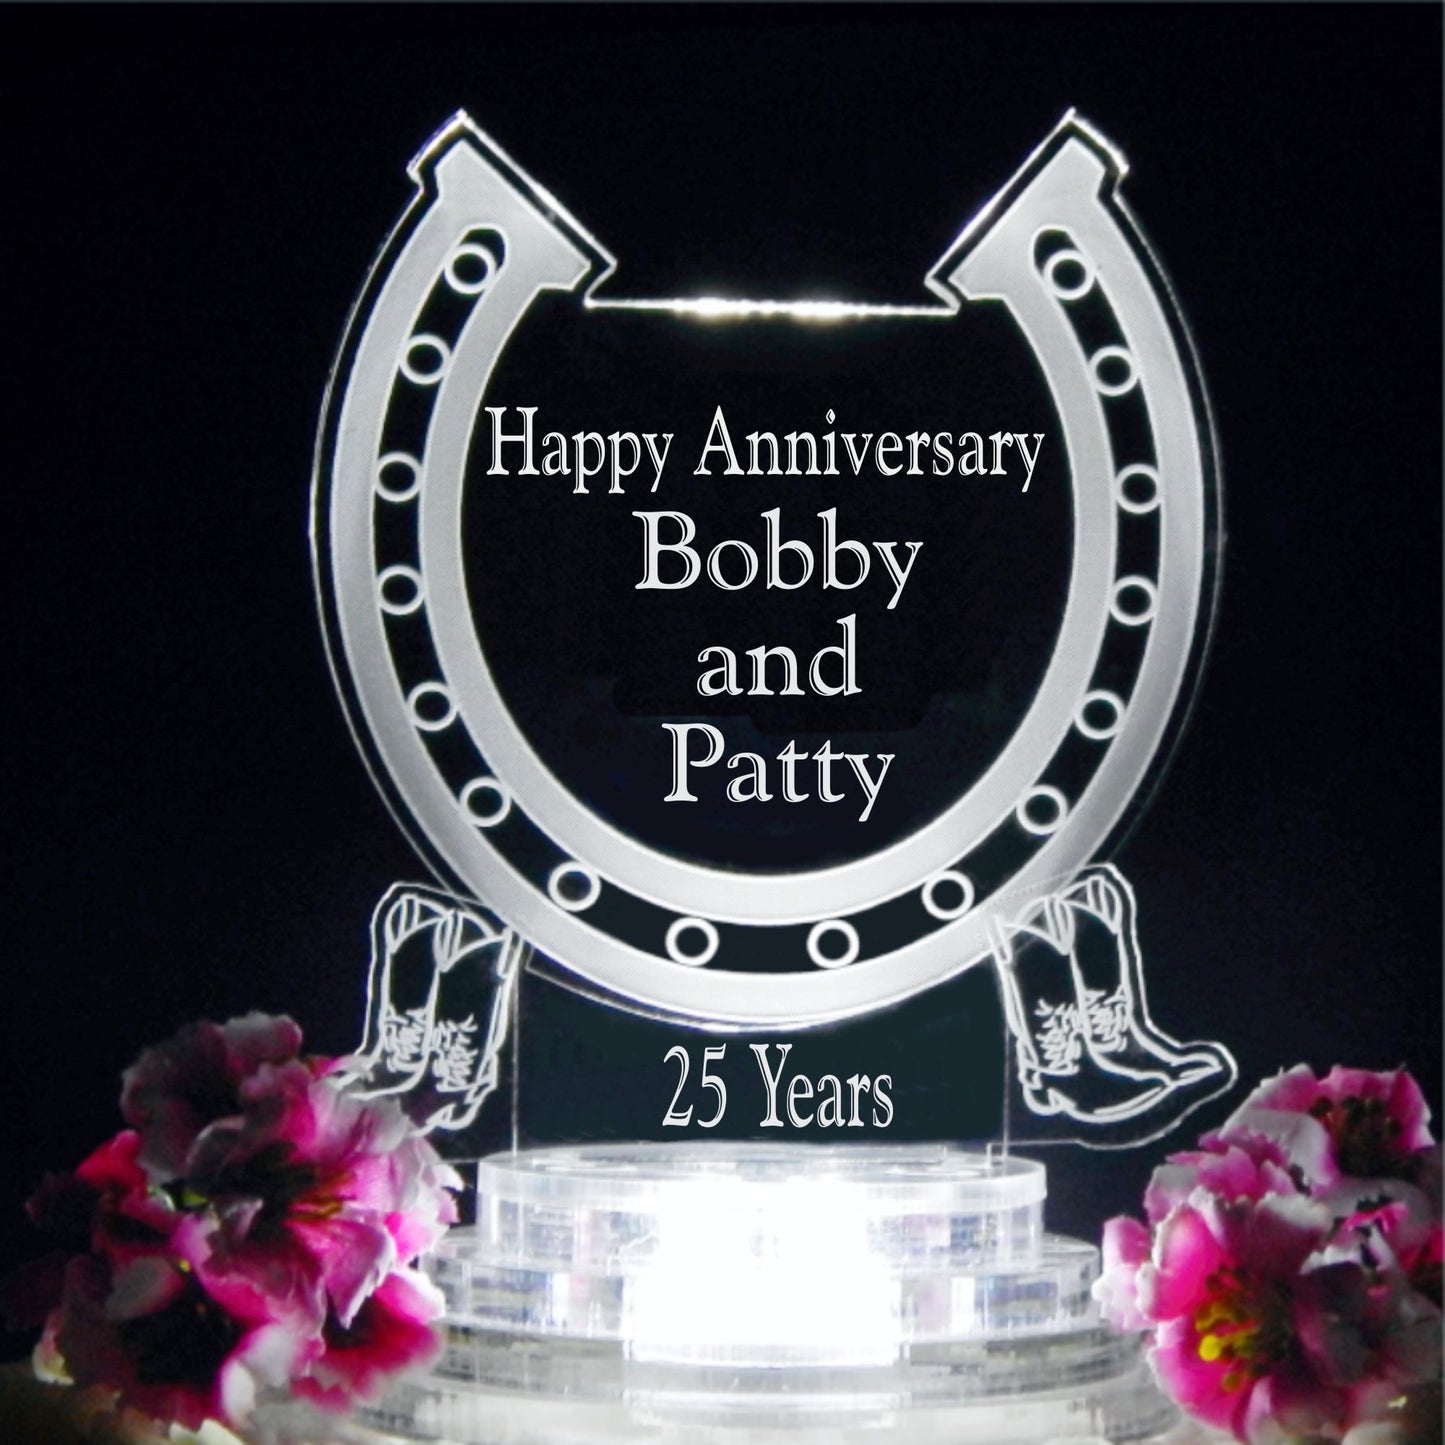 horseshoe shaped acrylic cake topper designed with a horseshoe design and engraved with names and Happy Anniversary